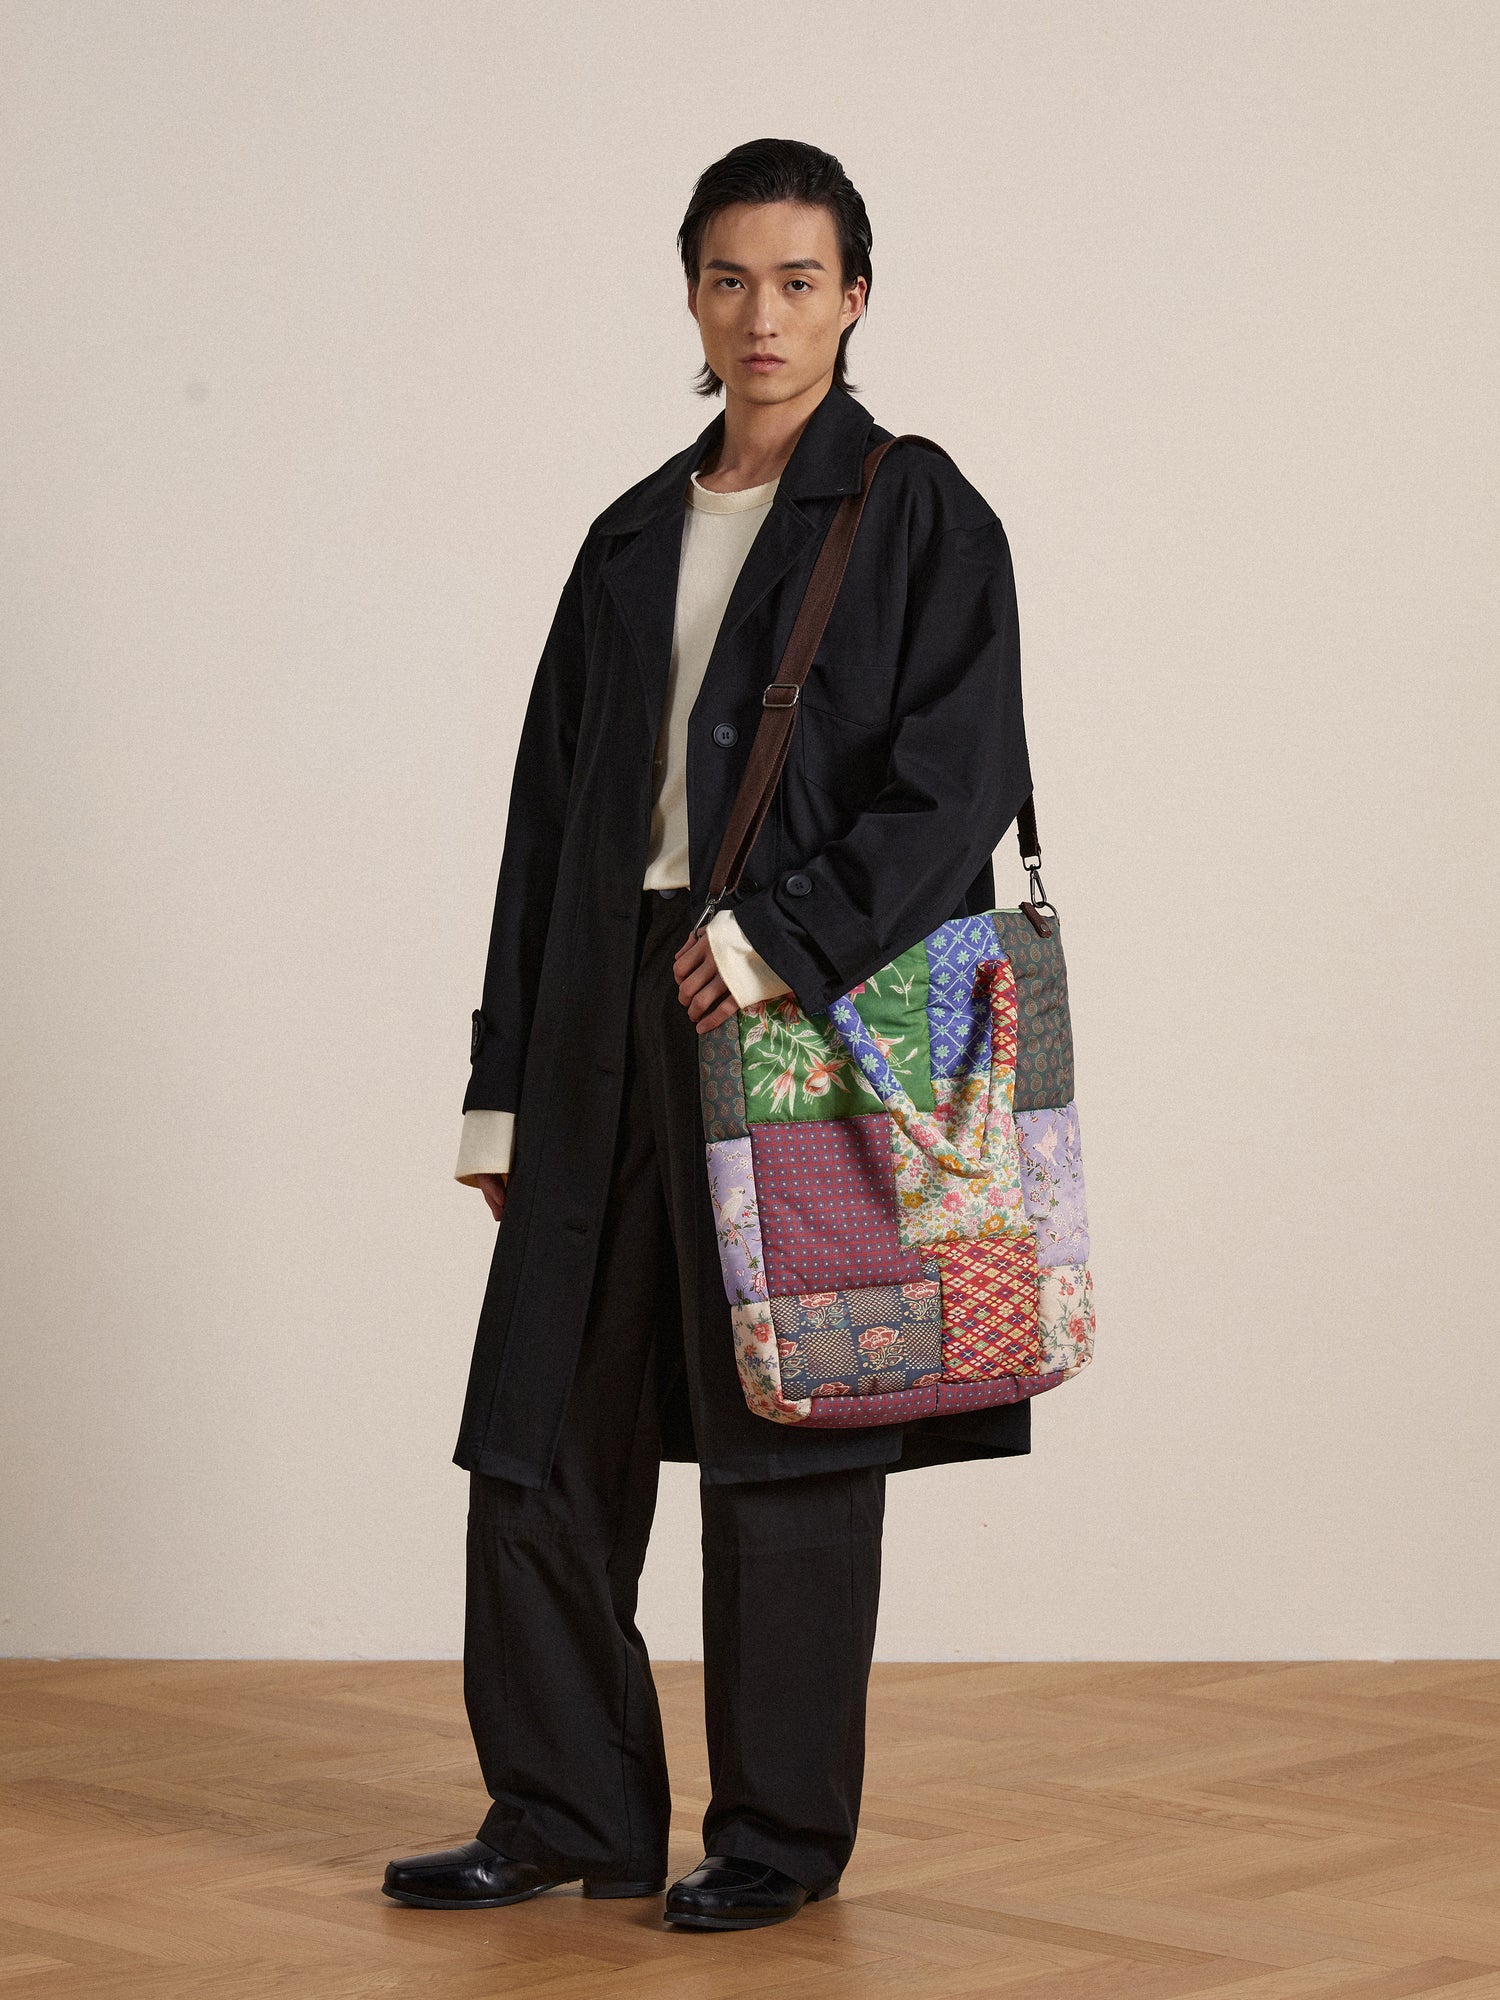 A man in a trench coat holding a Profound Gardenia Tapestry Bag showcasing South Asian prints.